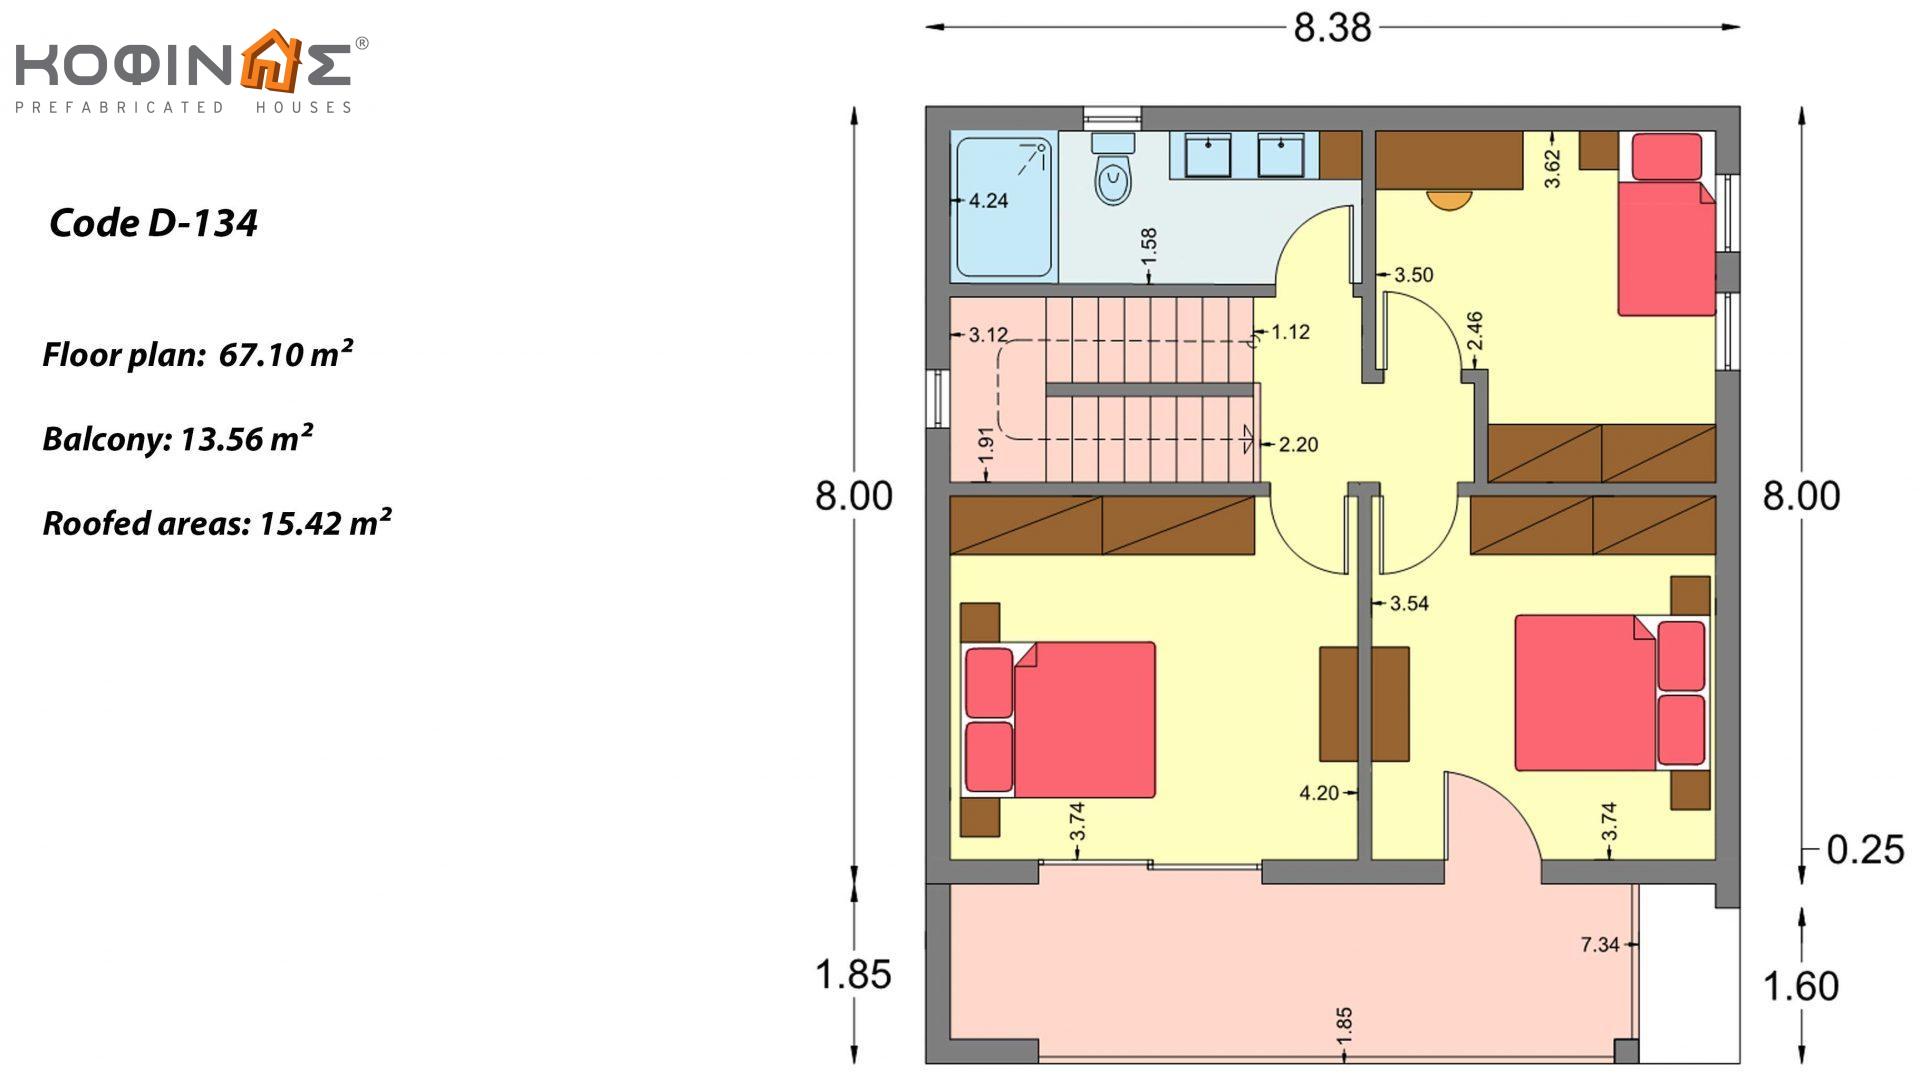 2-story house D-134, total surface of  134,26 m²,covered roofed areas 31,28 m², balconies13,56 m²